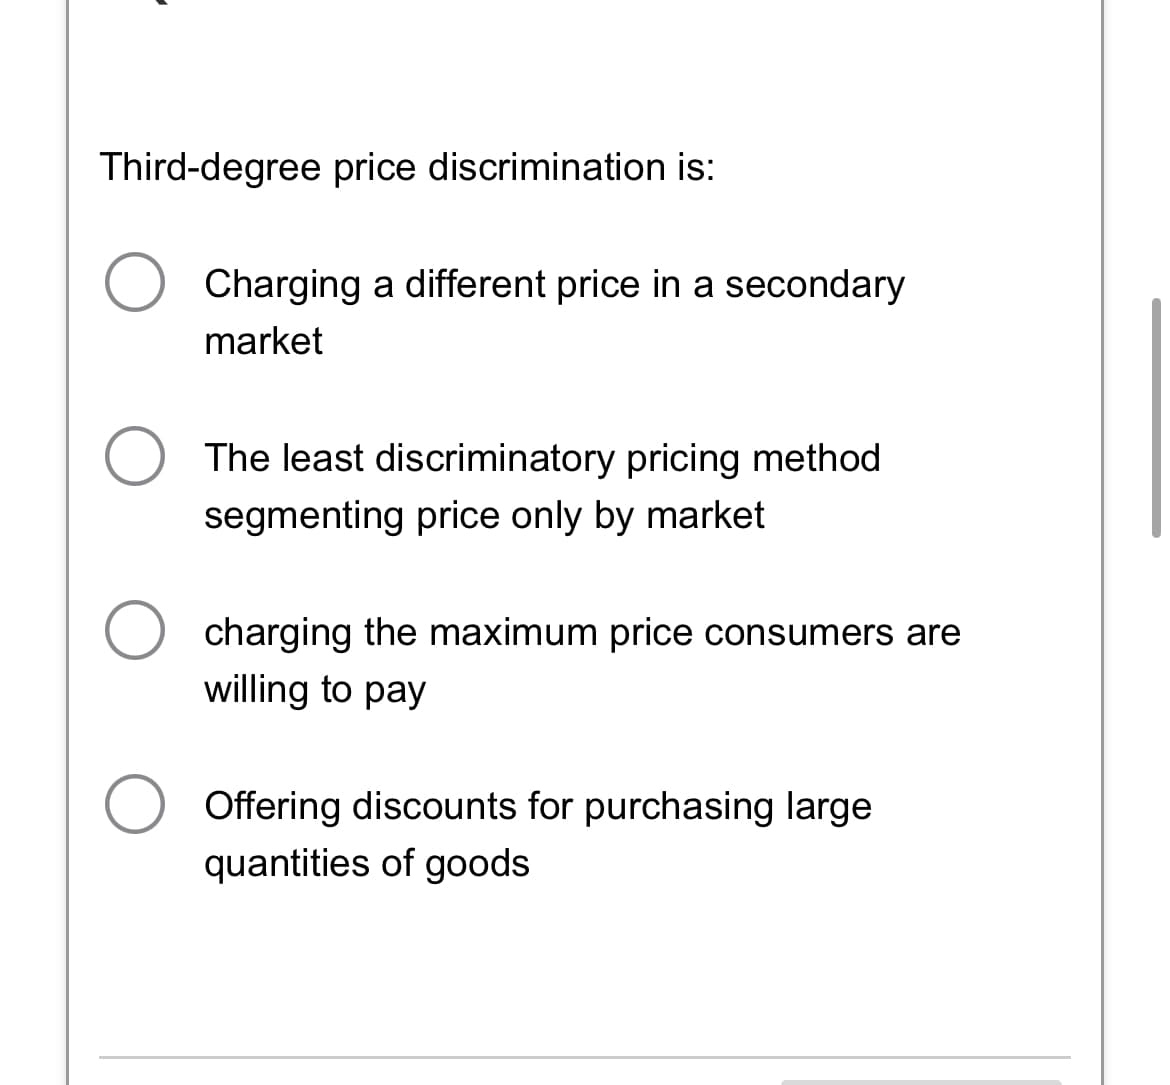 Third-degree price discrimination is:
Charging a different price in a secondary
market
The least discriminatory pricing method
segmenting price only by market
charging the maximum price consumers are
willing to pay
Offering discounts for purchasing large
quantities of goods